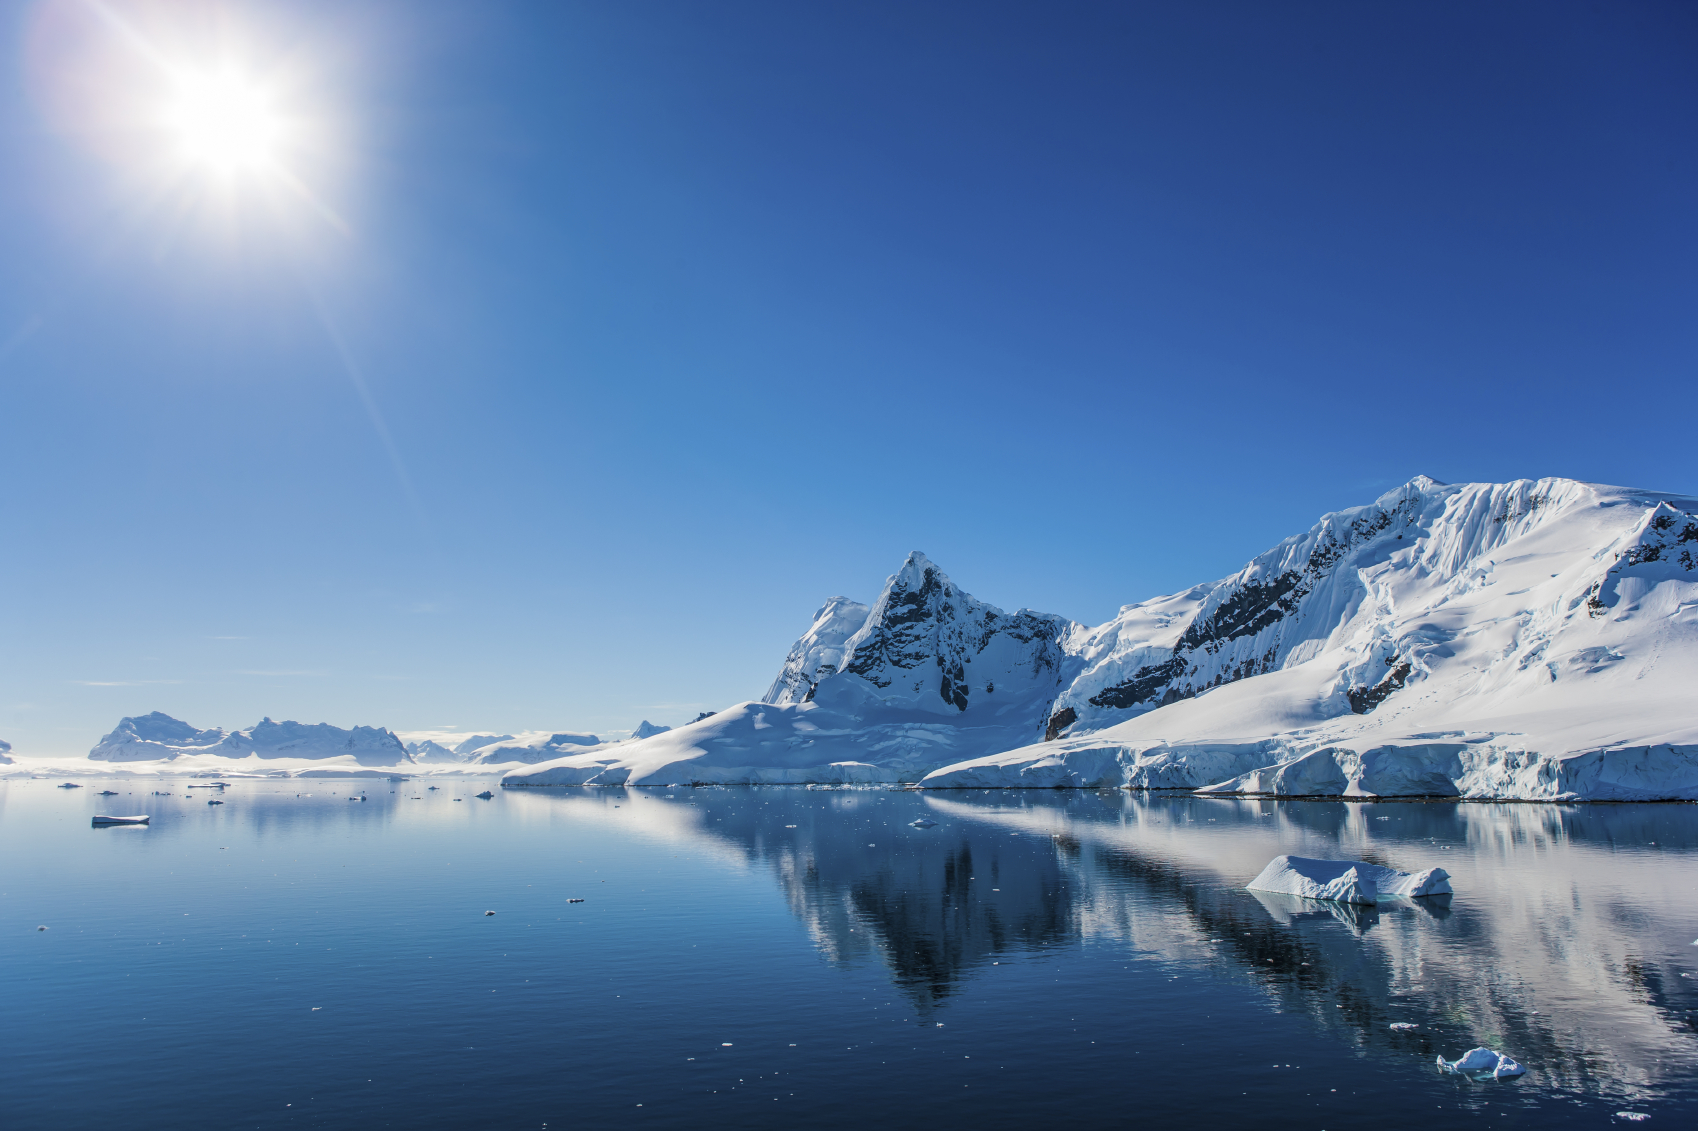 Antarctica is home to the world's grandest icebergs.